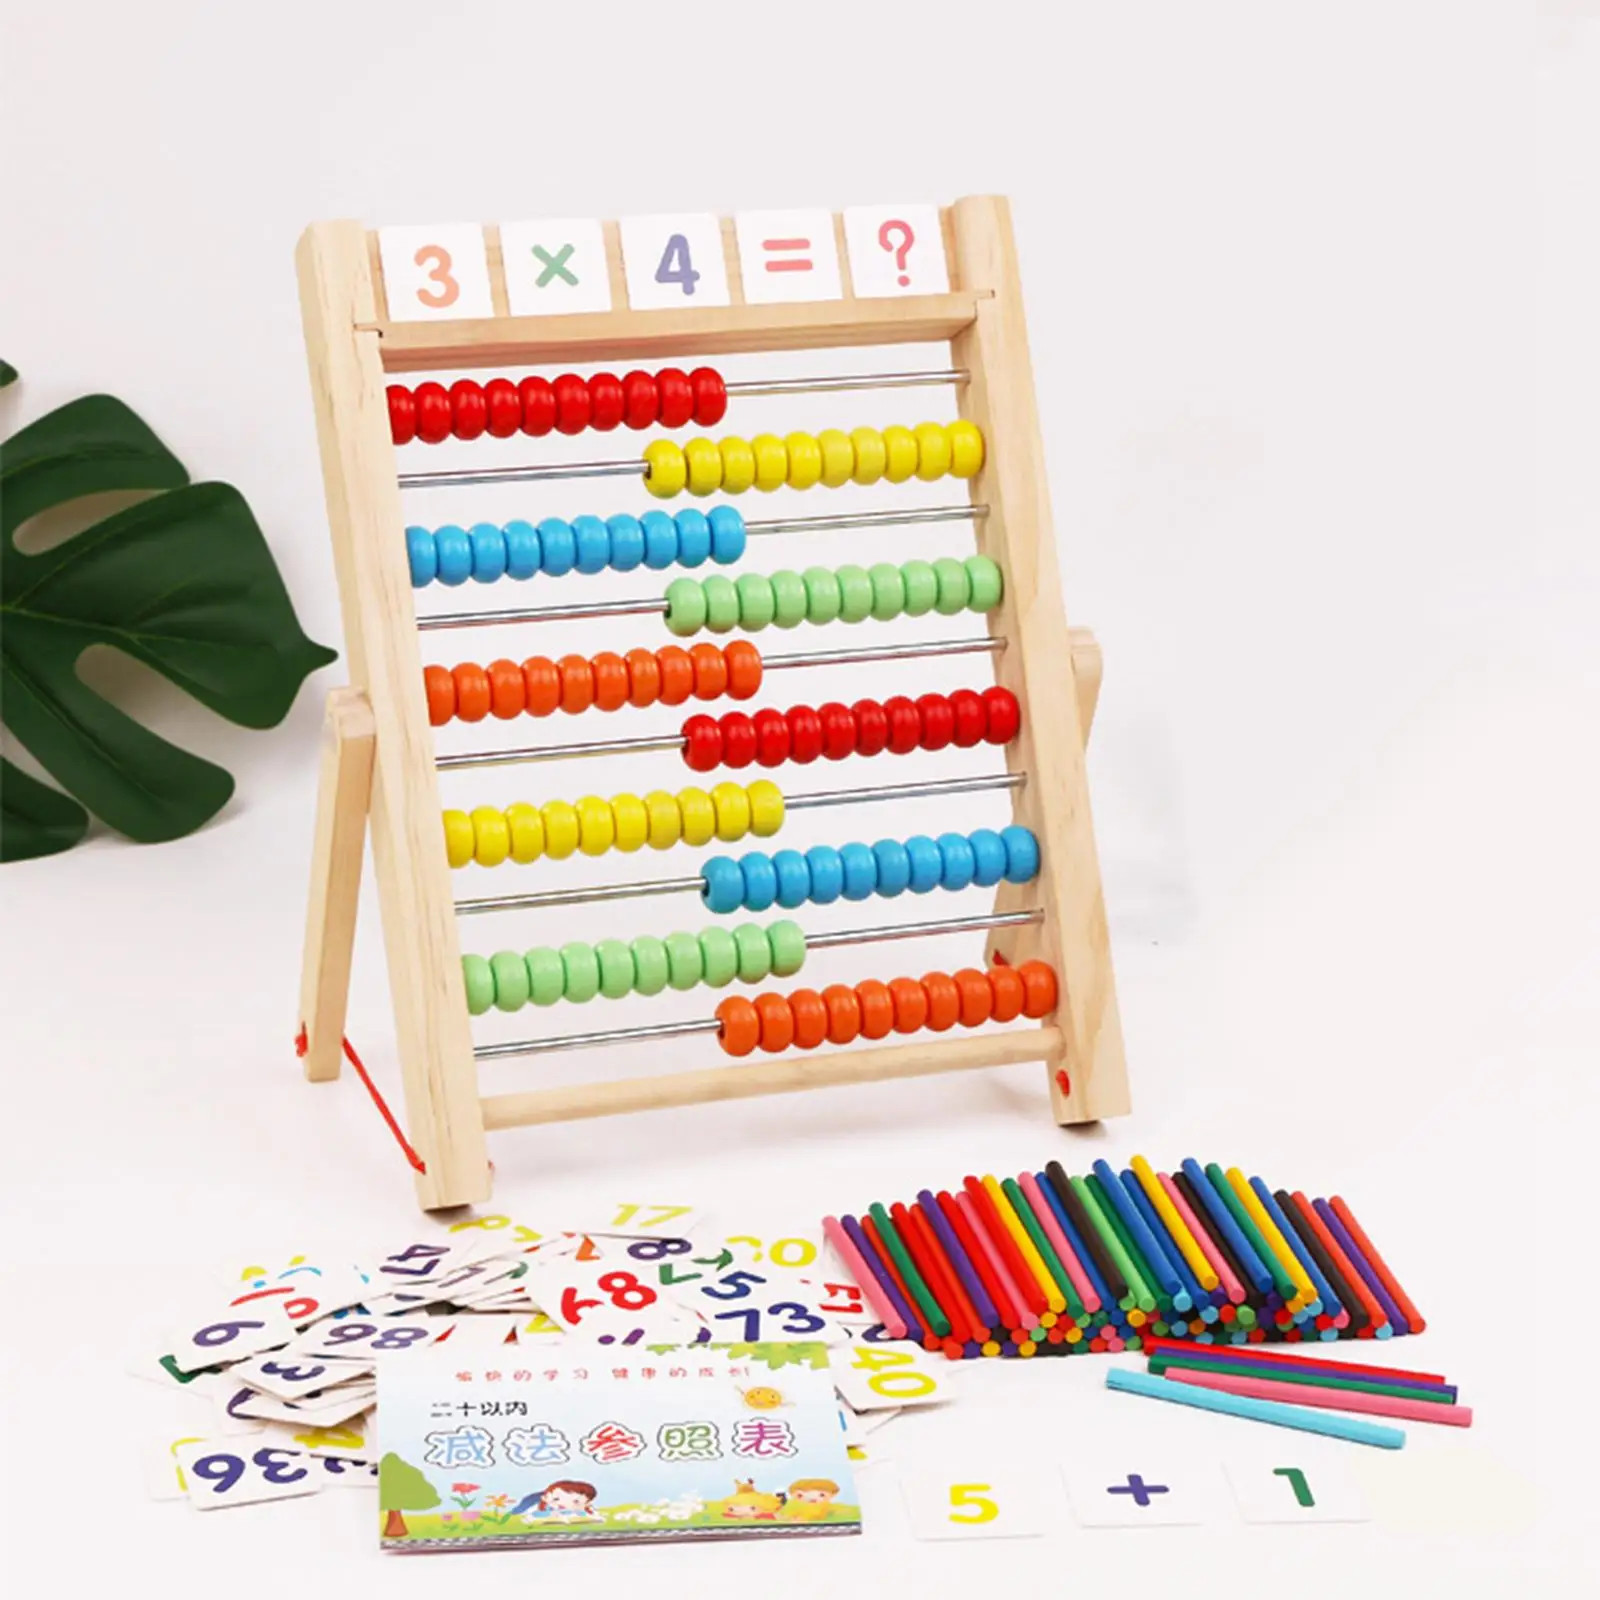 Wooden Abacus Counting Sticks with Multi Color Beads Educational Counting Toy for Toddlers Kids Preschool Kindergarten Children